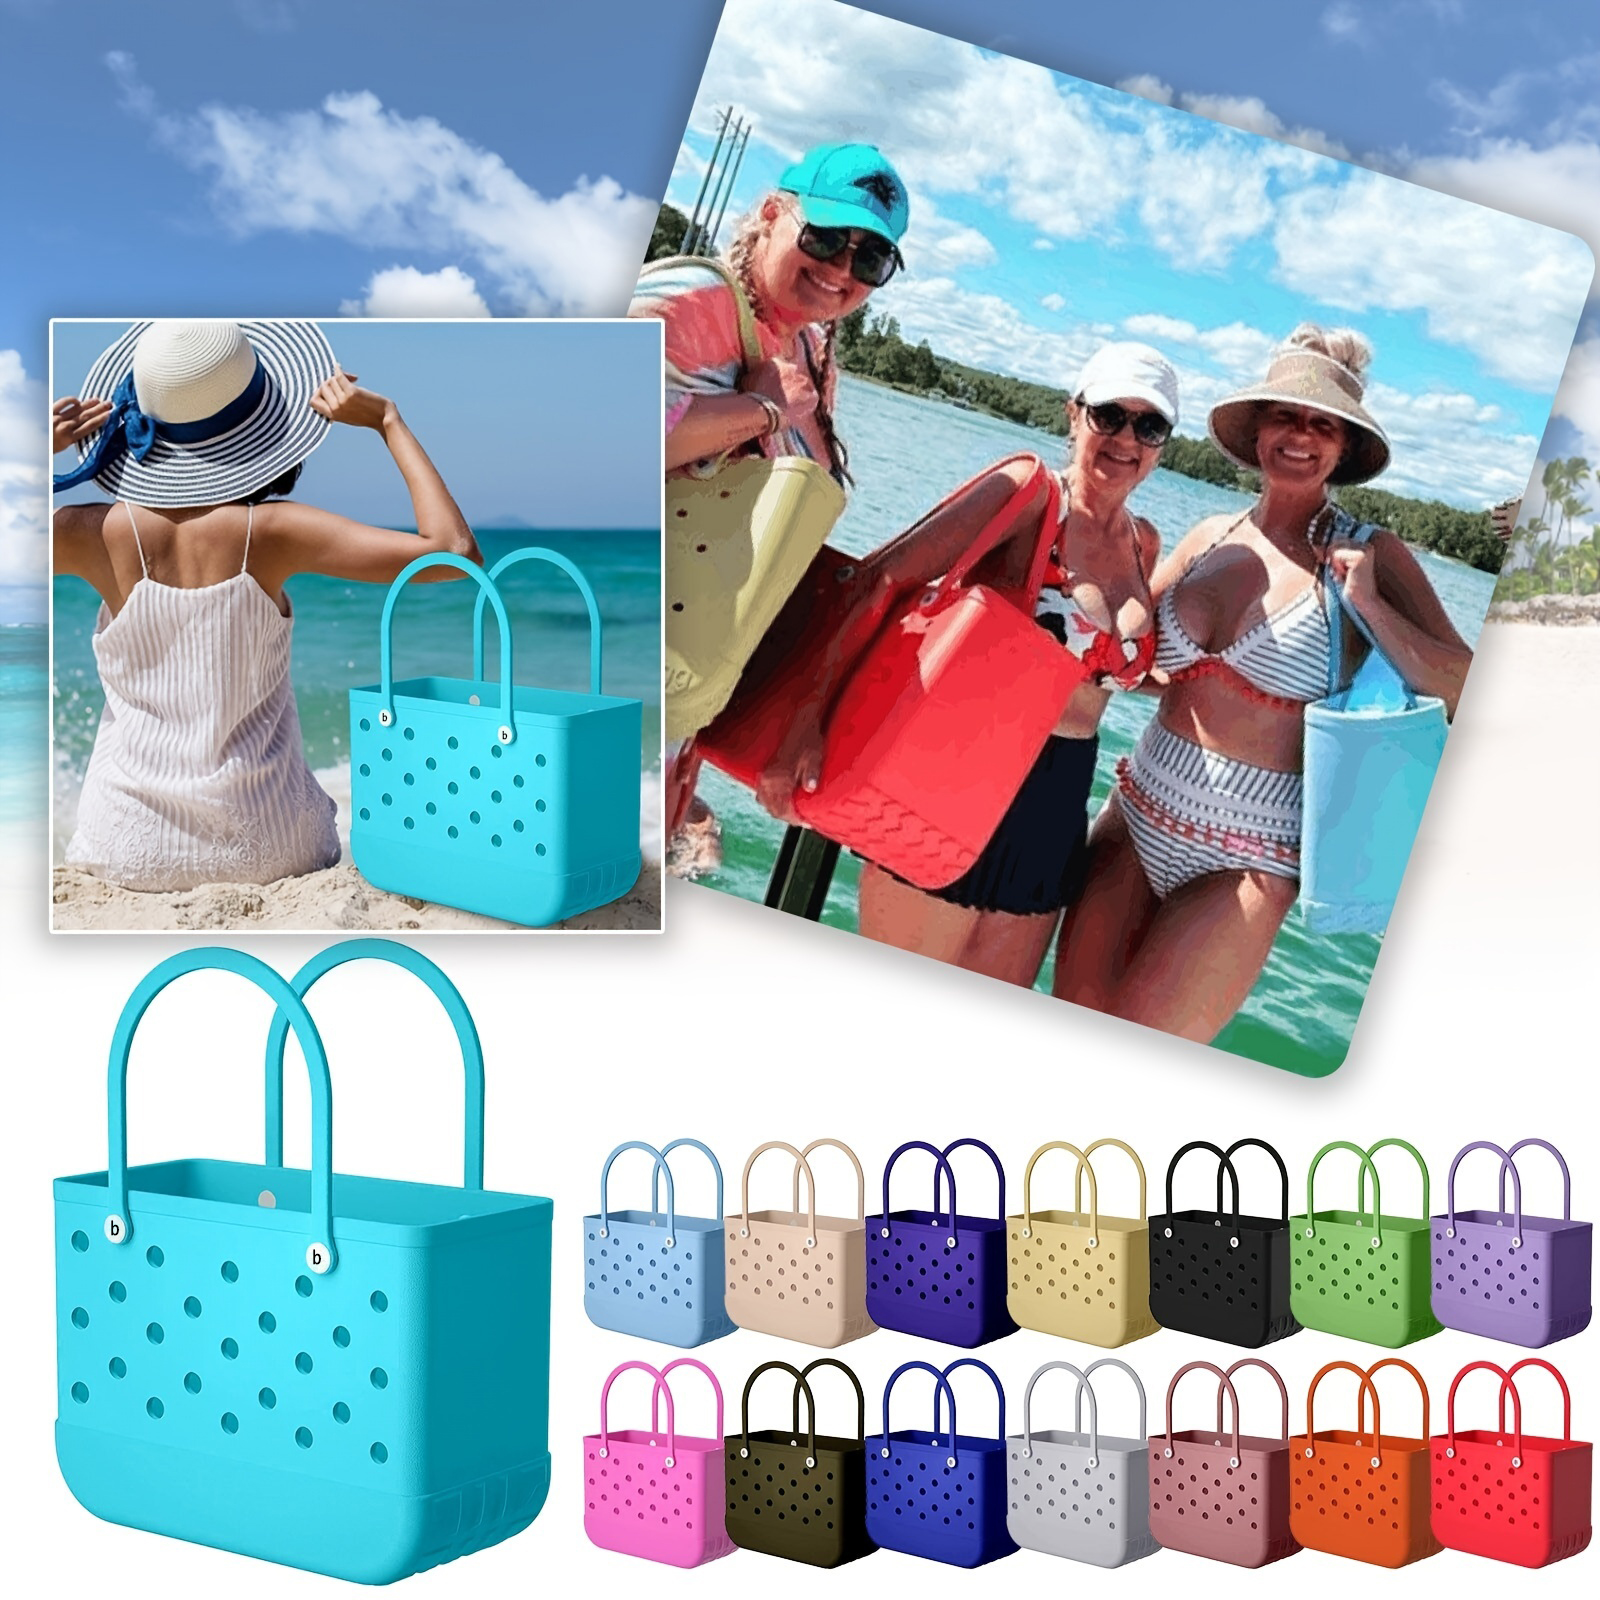  BABY BOGG BAG Small Waterproof Washable Tote for Beach Boat  15x13x5.25 (Pretty as a PERIWINKLE) : Clothing, Shoes & Jewelry